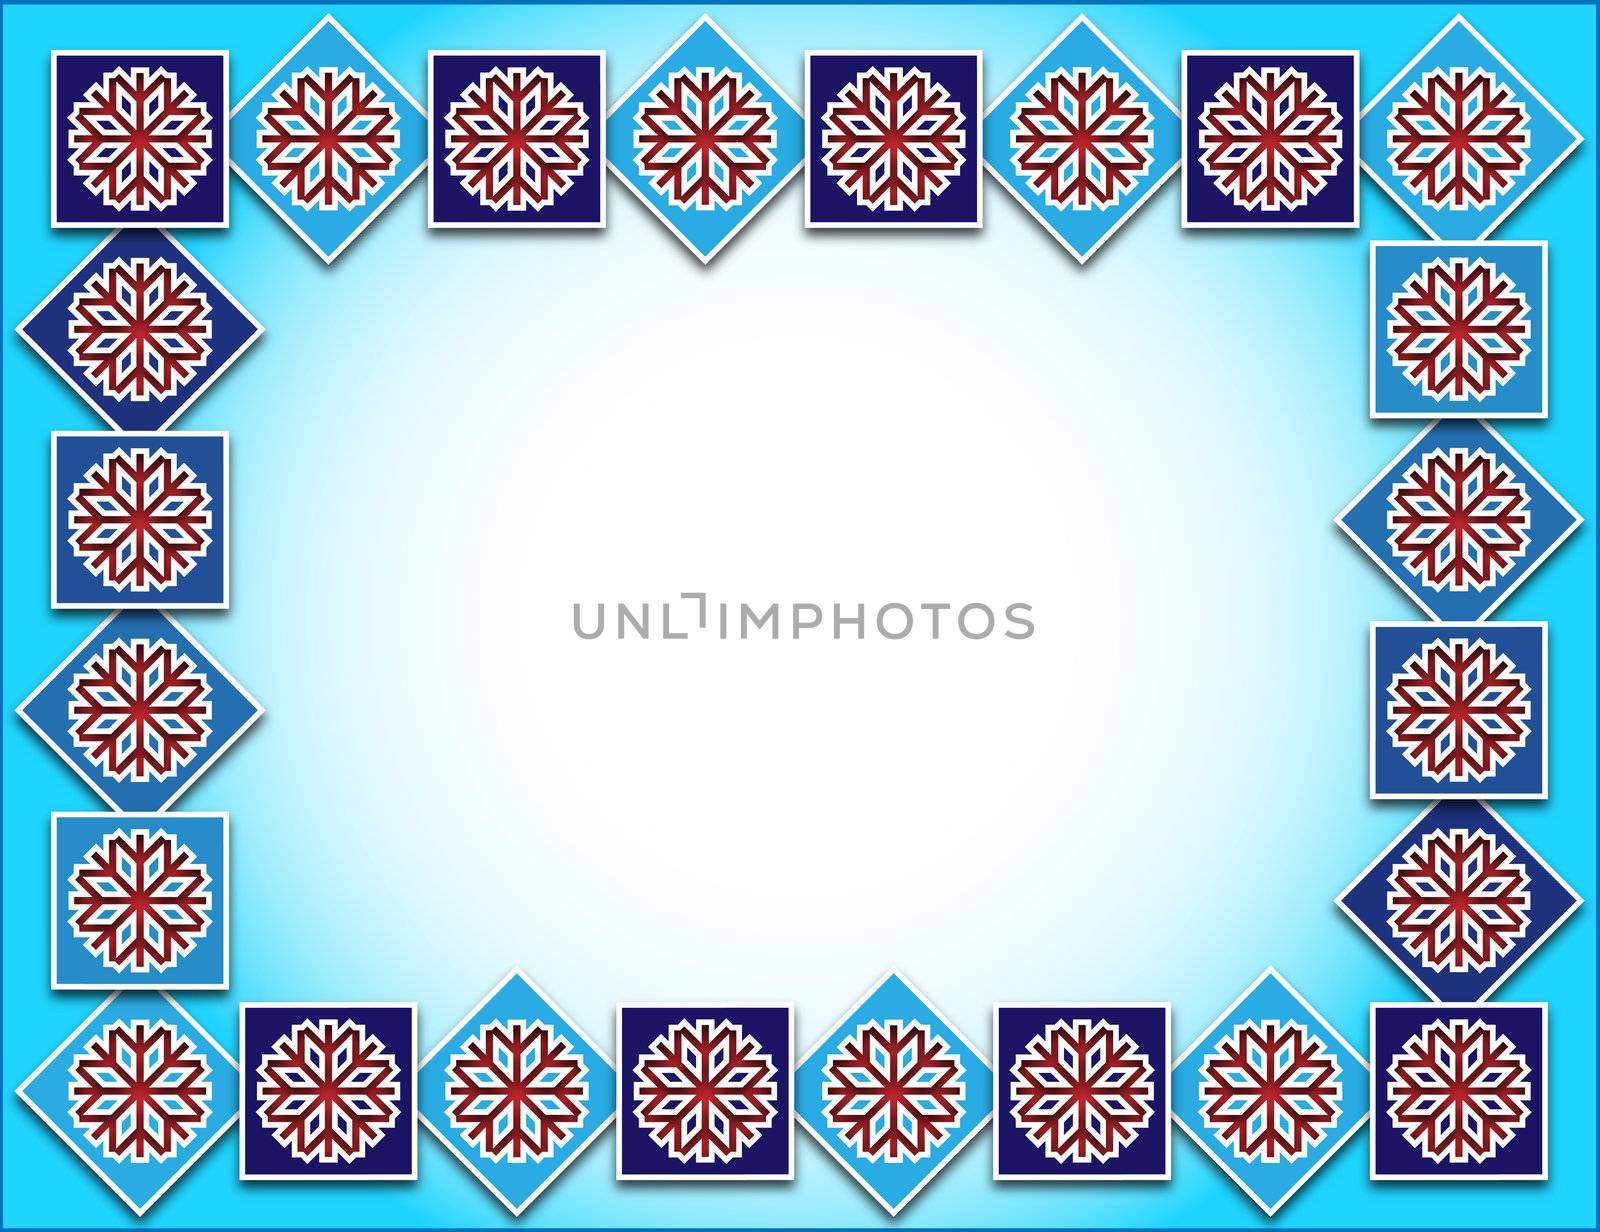 winter background with snowflakes on red squares distributed in the frame